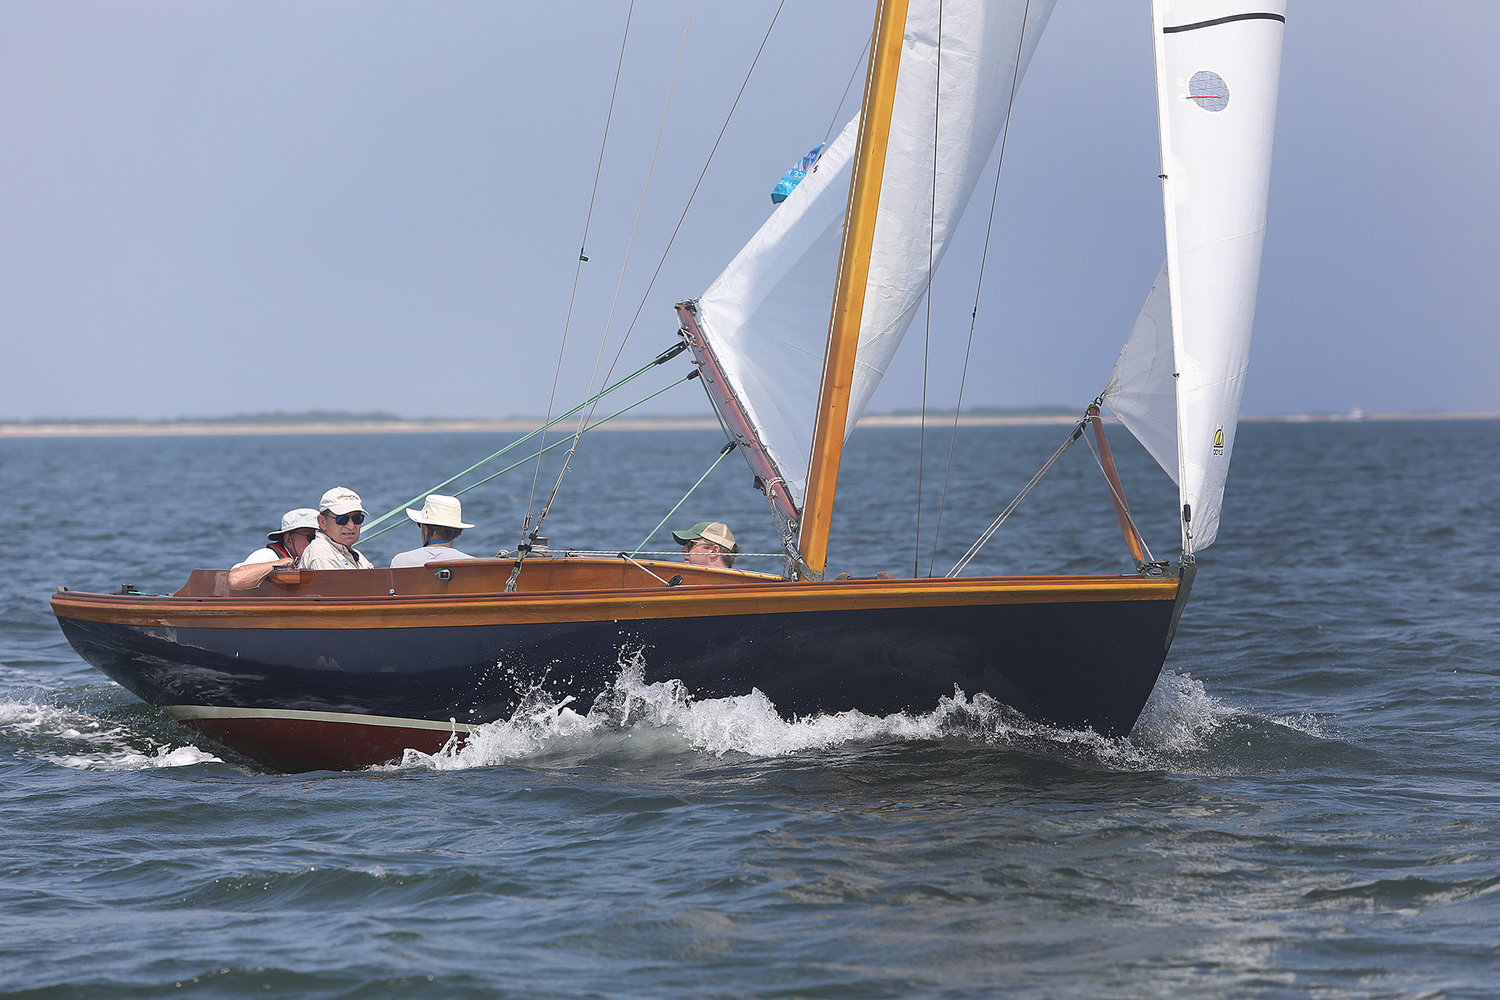 Serendipity, captained by Harry Rein competes in the Alerion division of the One Design Regatta in Nantucket Harbor on the opening day of Race Week 2021.